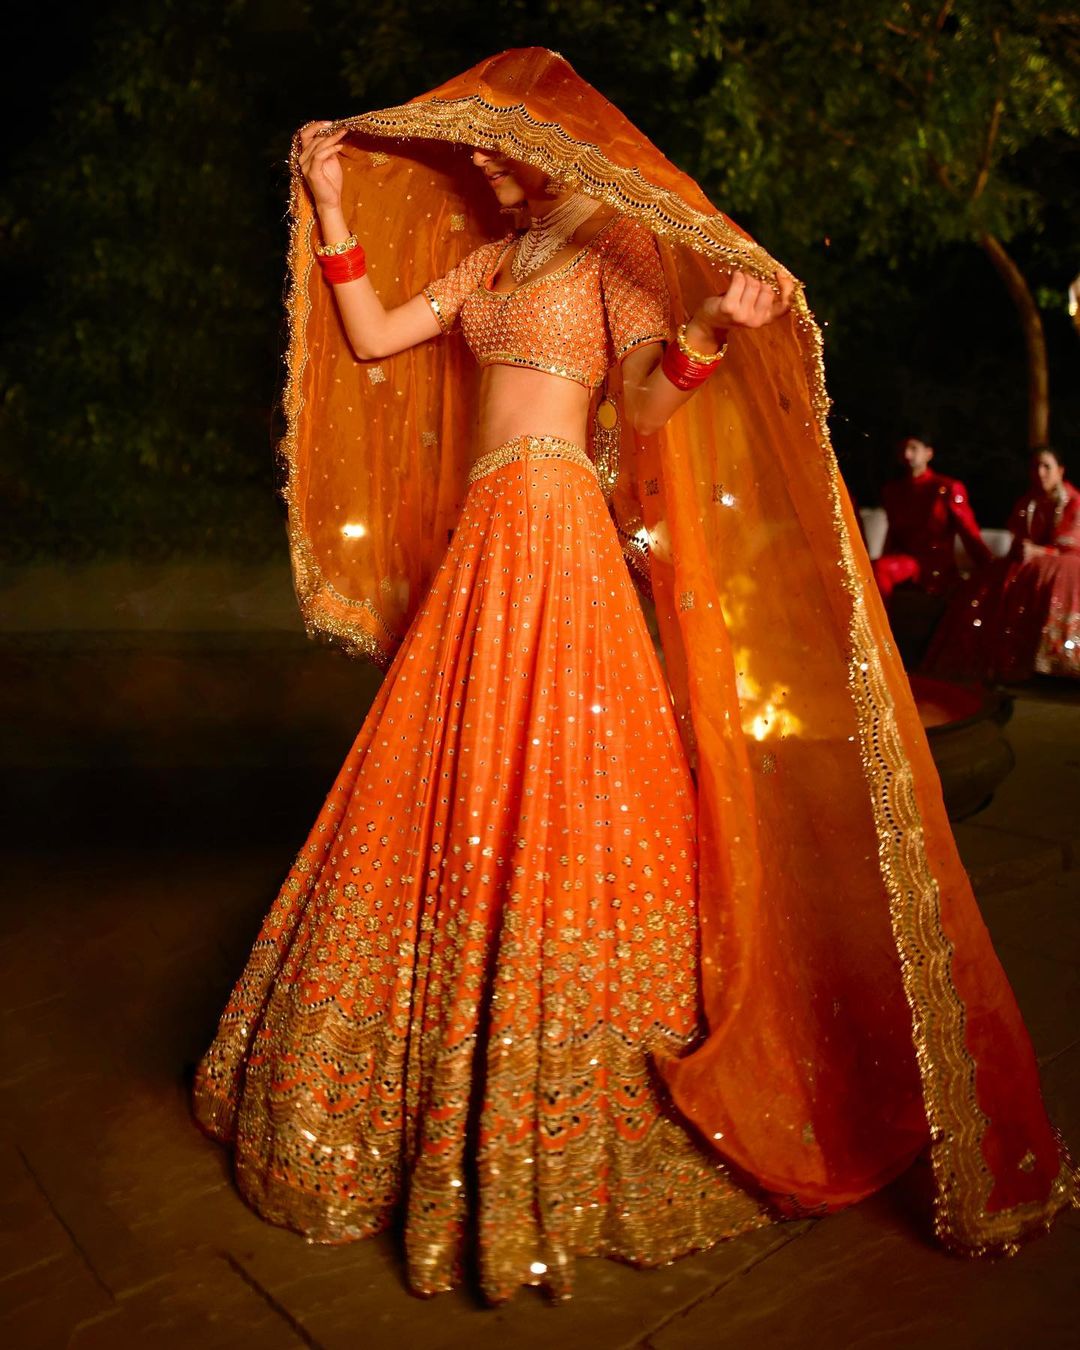 A Beautiful Bride Is Glistening In The Art Of Mirror Work